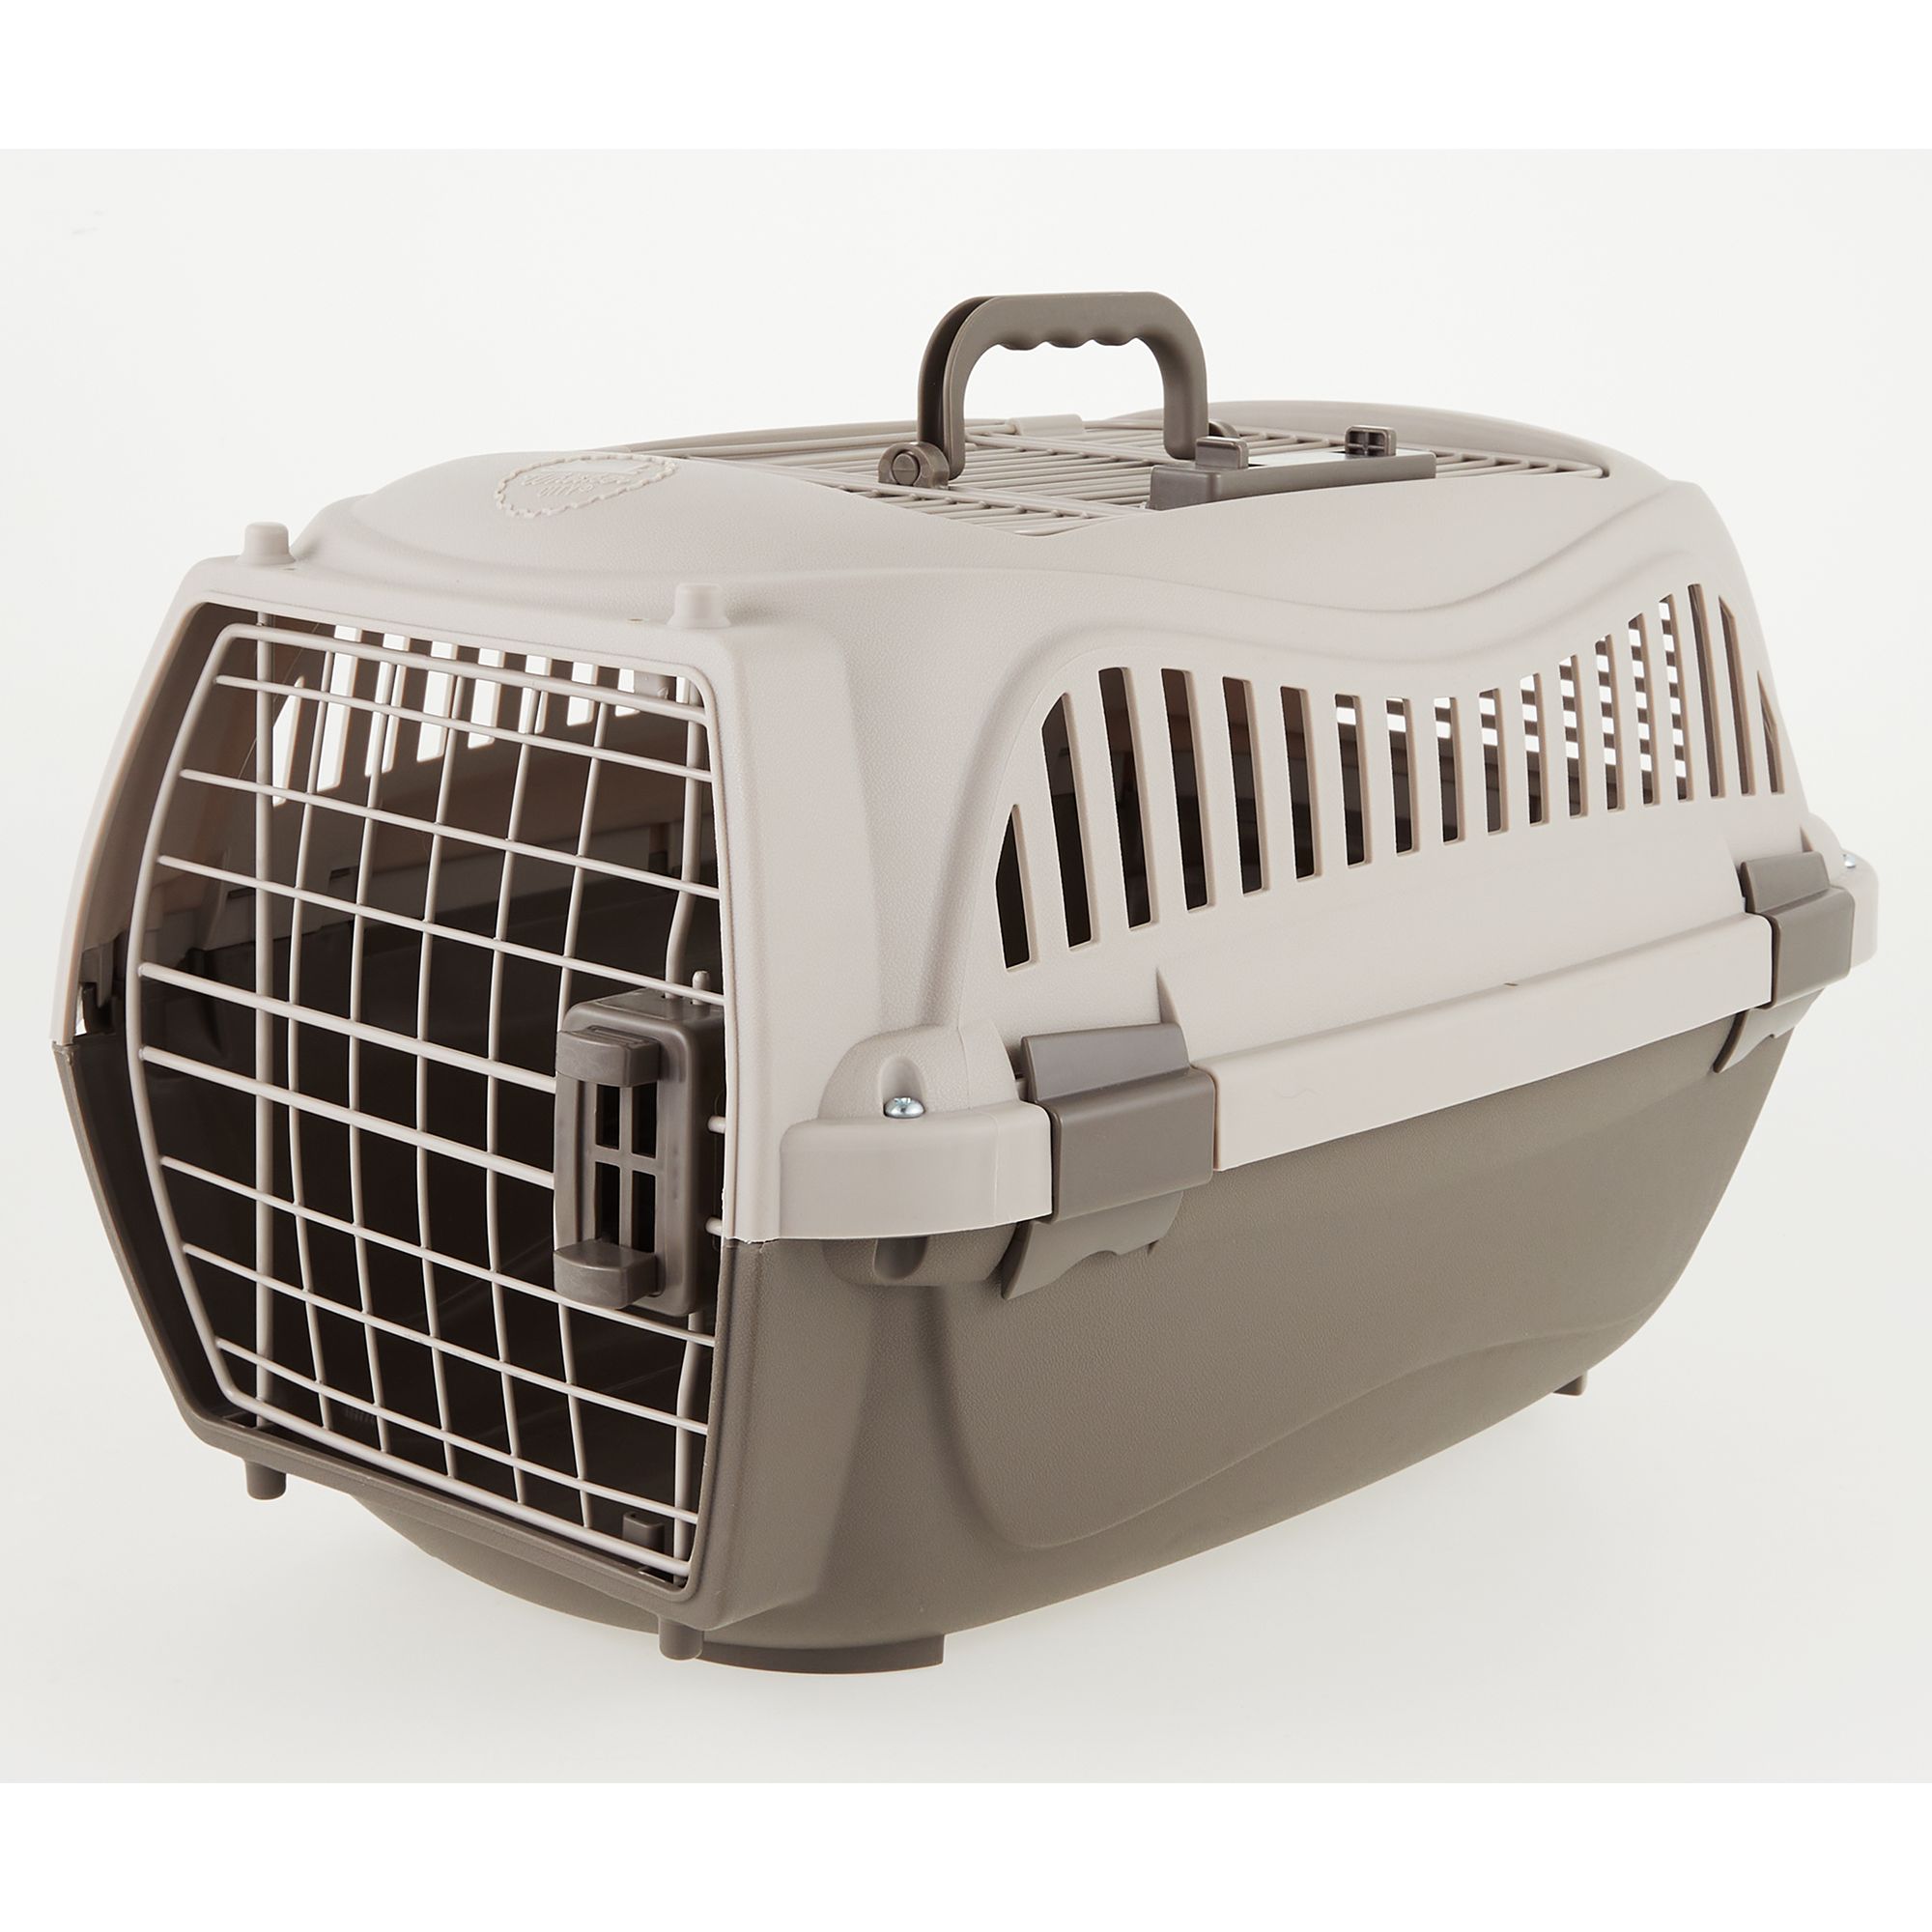 FUKUMARU Cat Carrier Airline Approved Soft Sided Dog Carrier Collapsible Cat Travel Bag Under 44 lb Small Medium Large Pet Carri